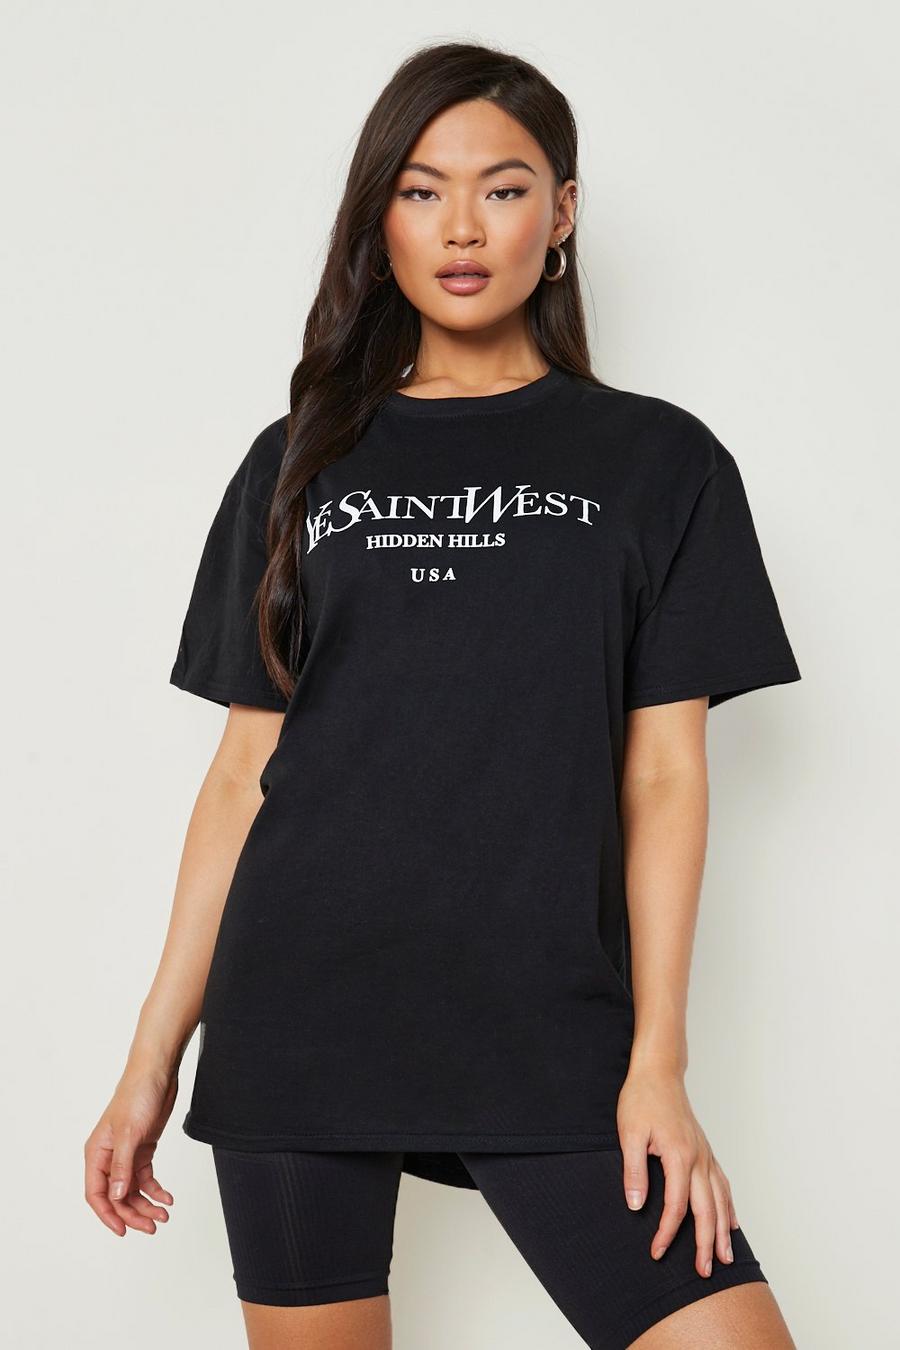 Uendelighed sø Adgang Oversized T Shirts | Womens Oversized Tops & Shirts | boohoo USA